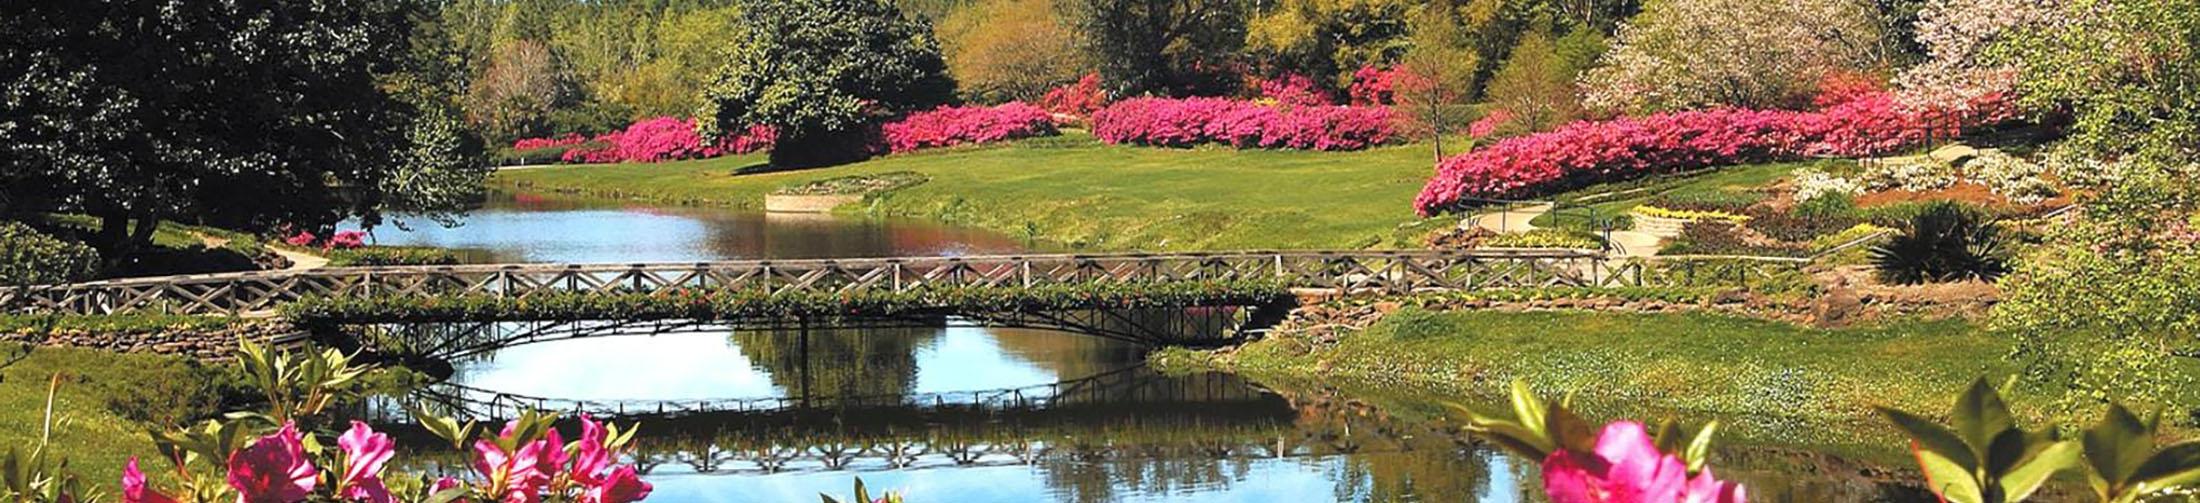 Bellingrath Gardens, an attraction located near our gulf coast college.